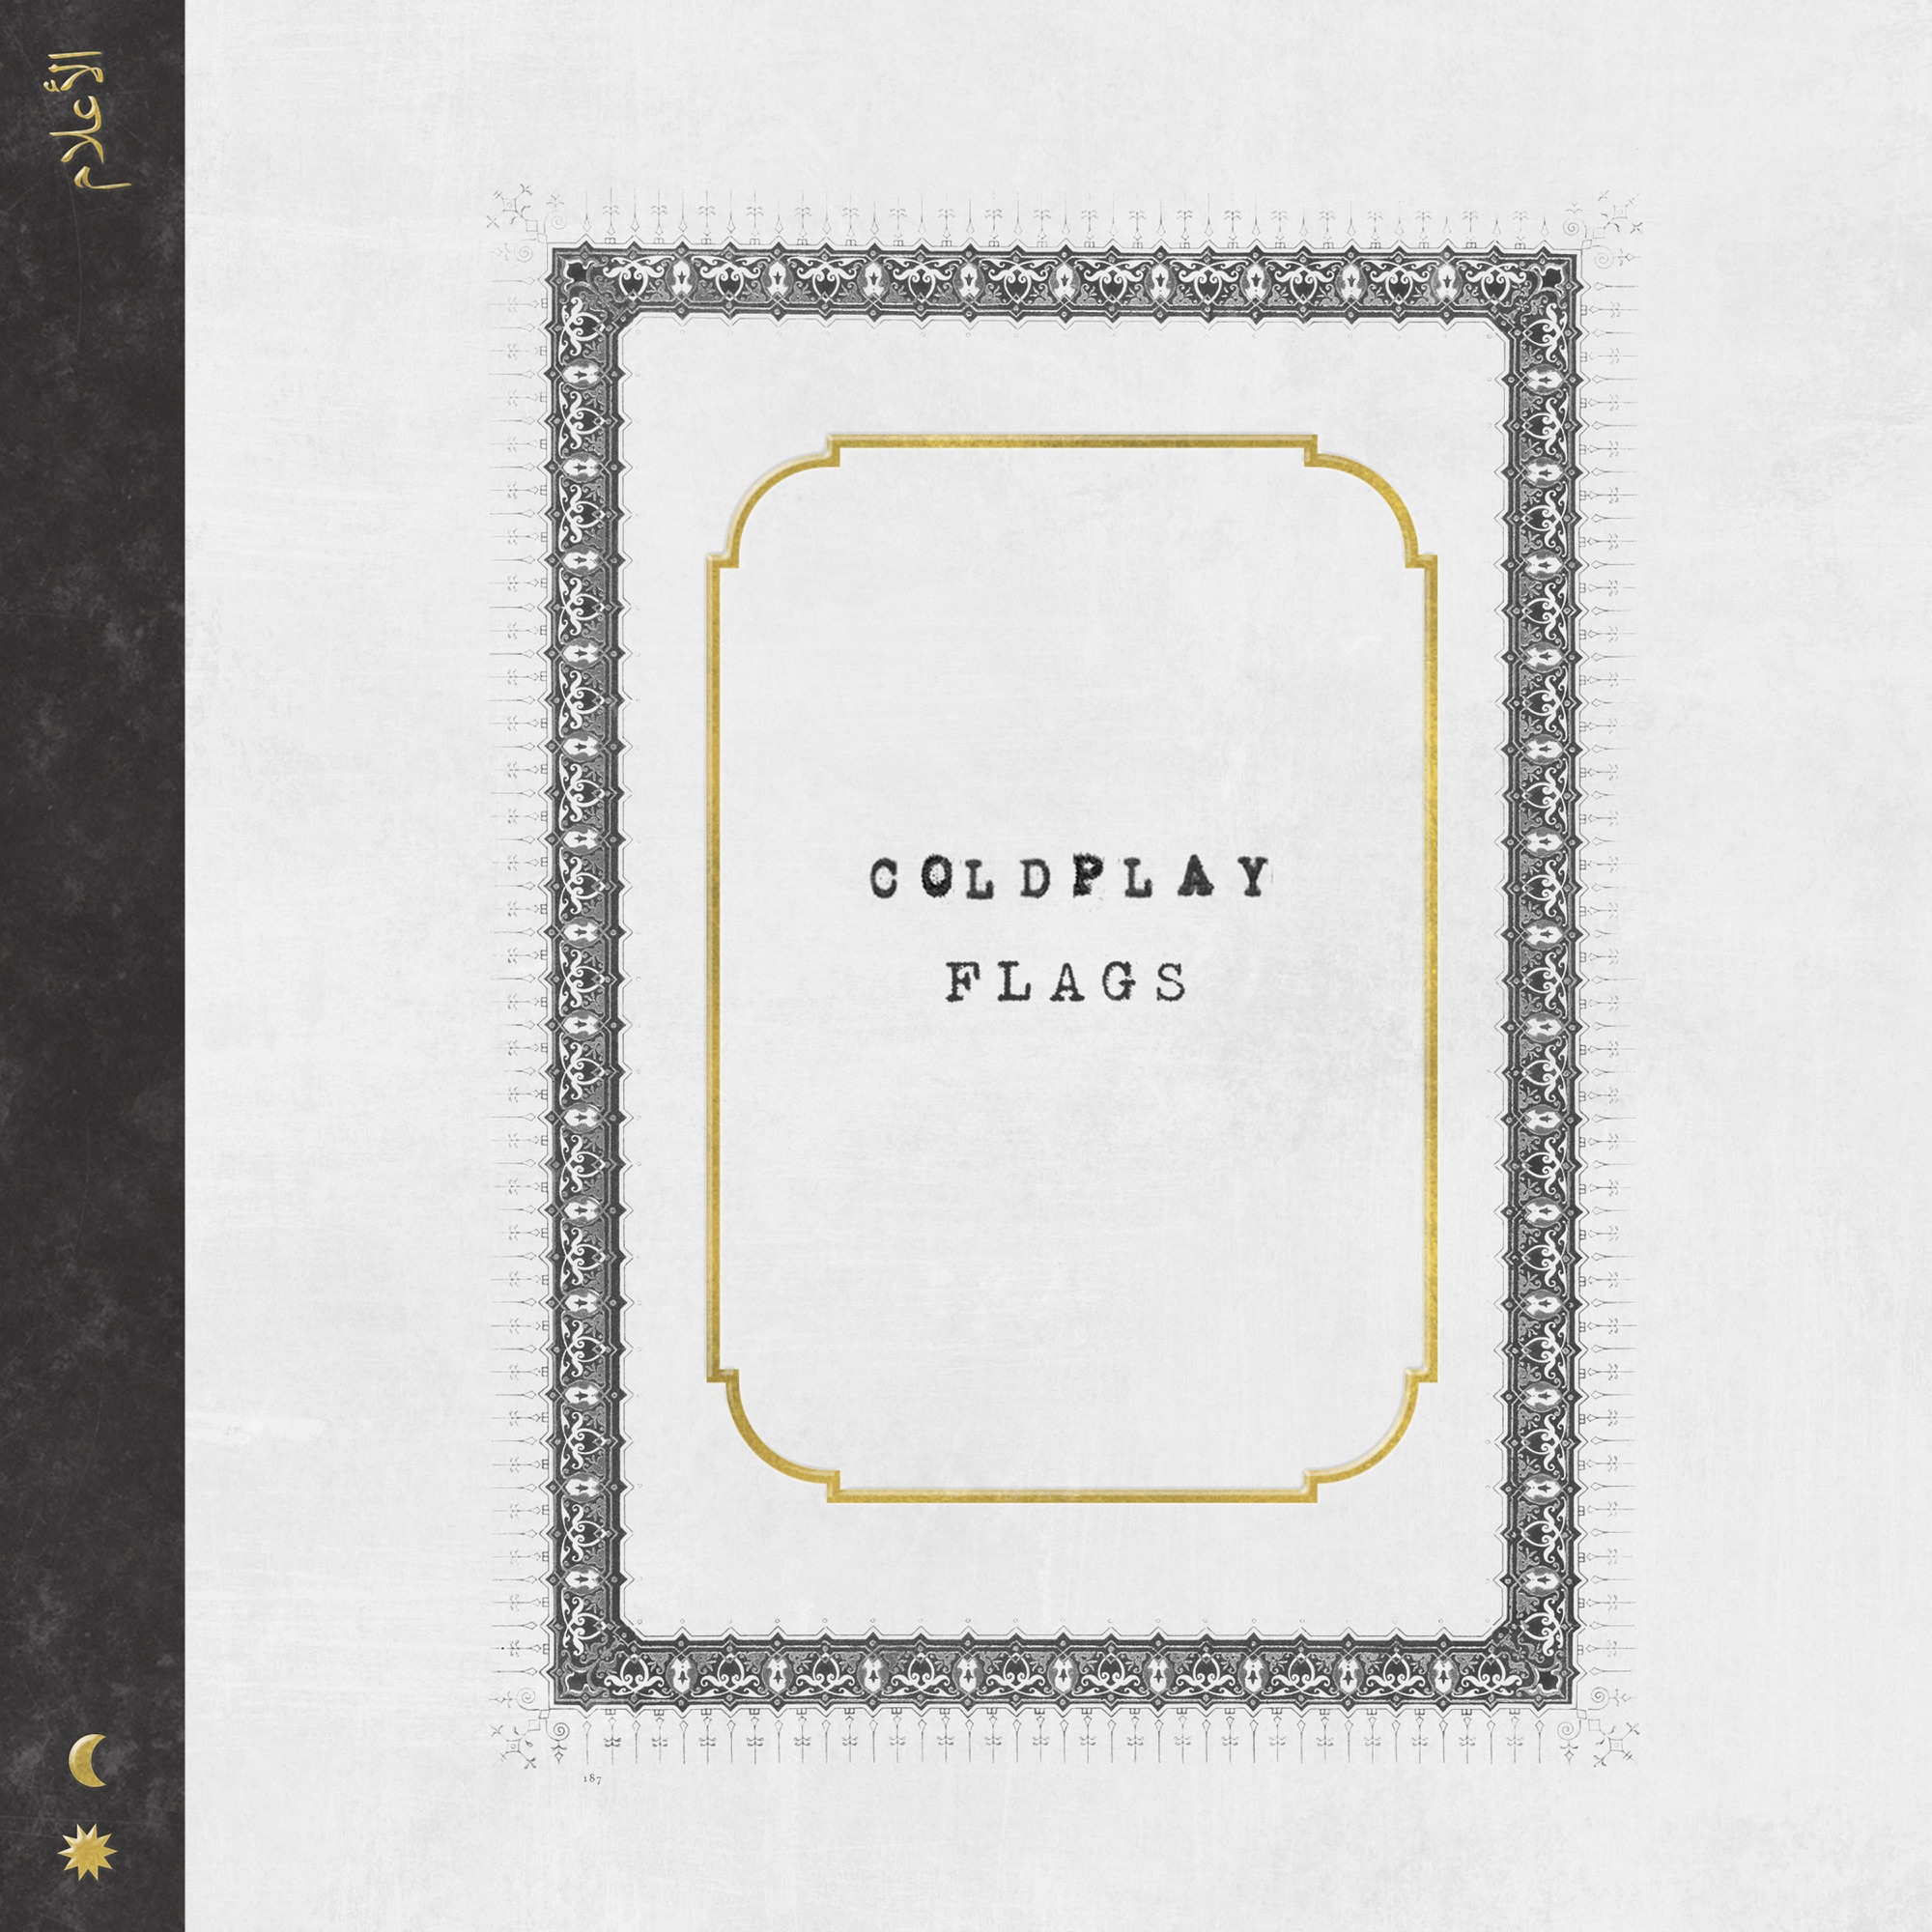 Coldplay - Flags - Single